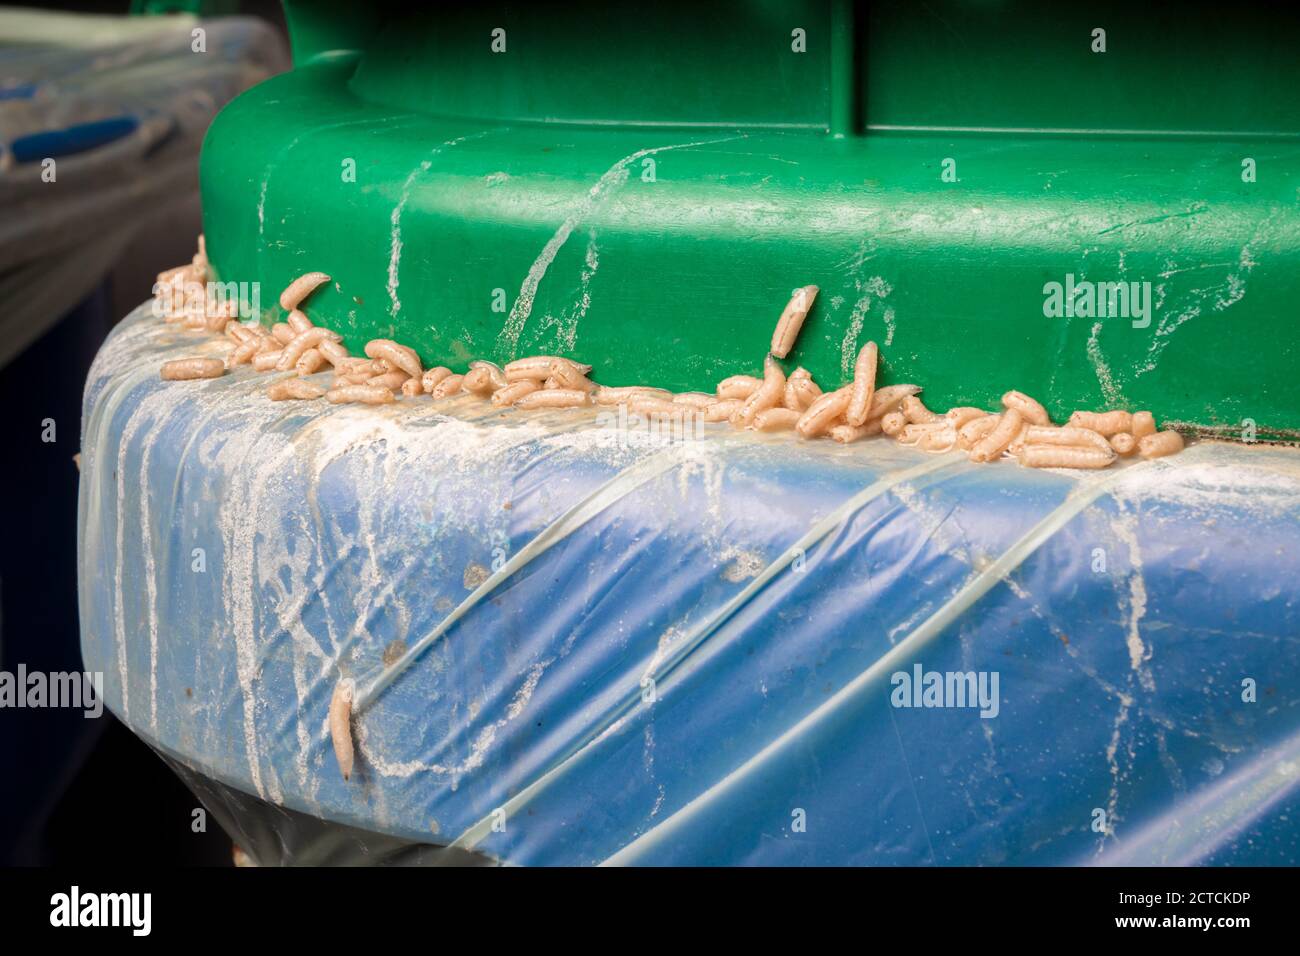 Maggots infestation in organics container, green bin or compost. Maggot feasting on leftovers. Many fly larvaes stuck between bag, bin and lid. Garbag Stock Photo